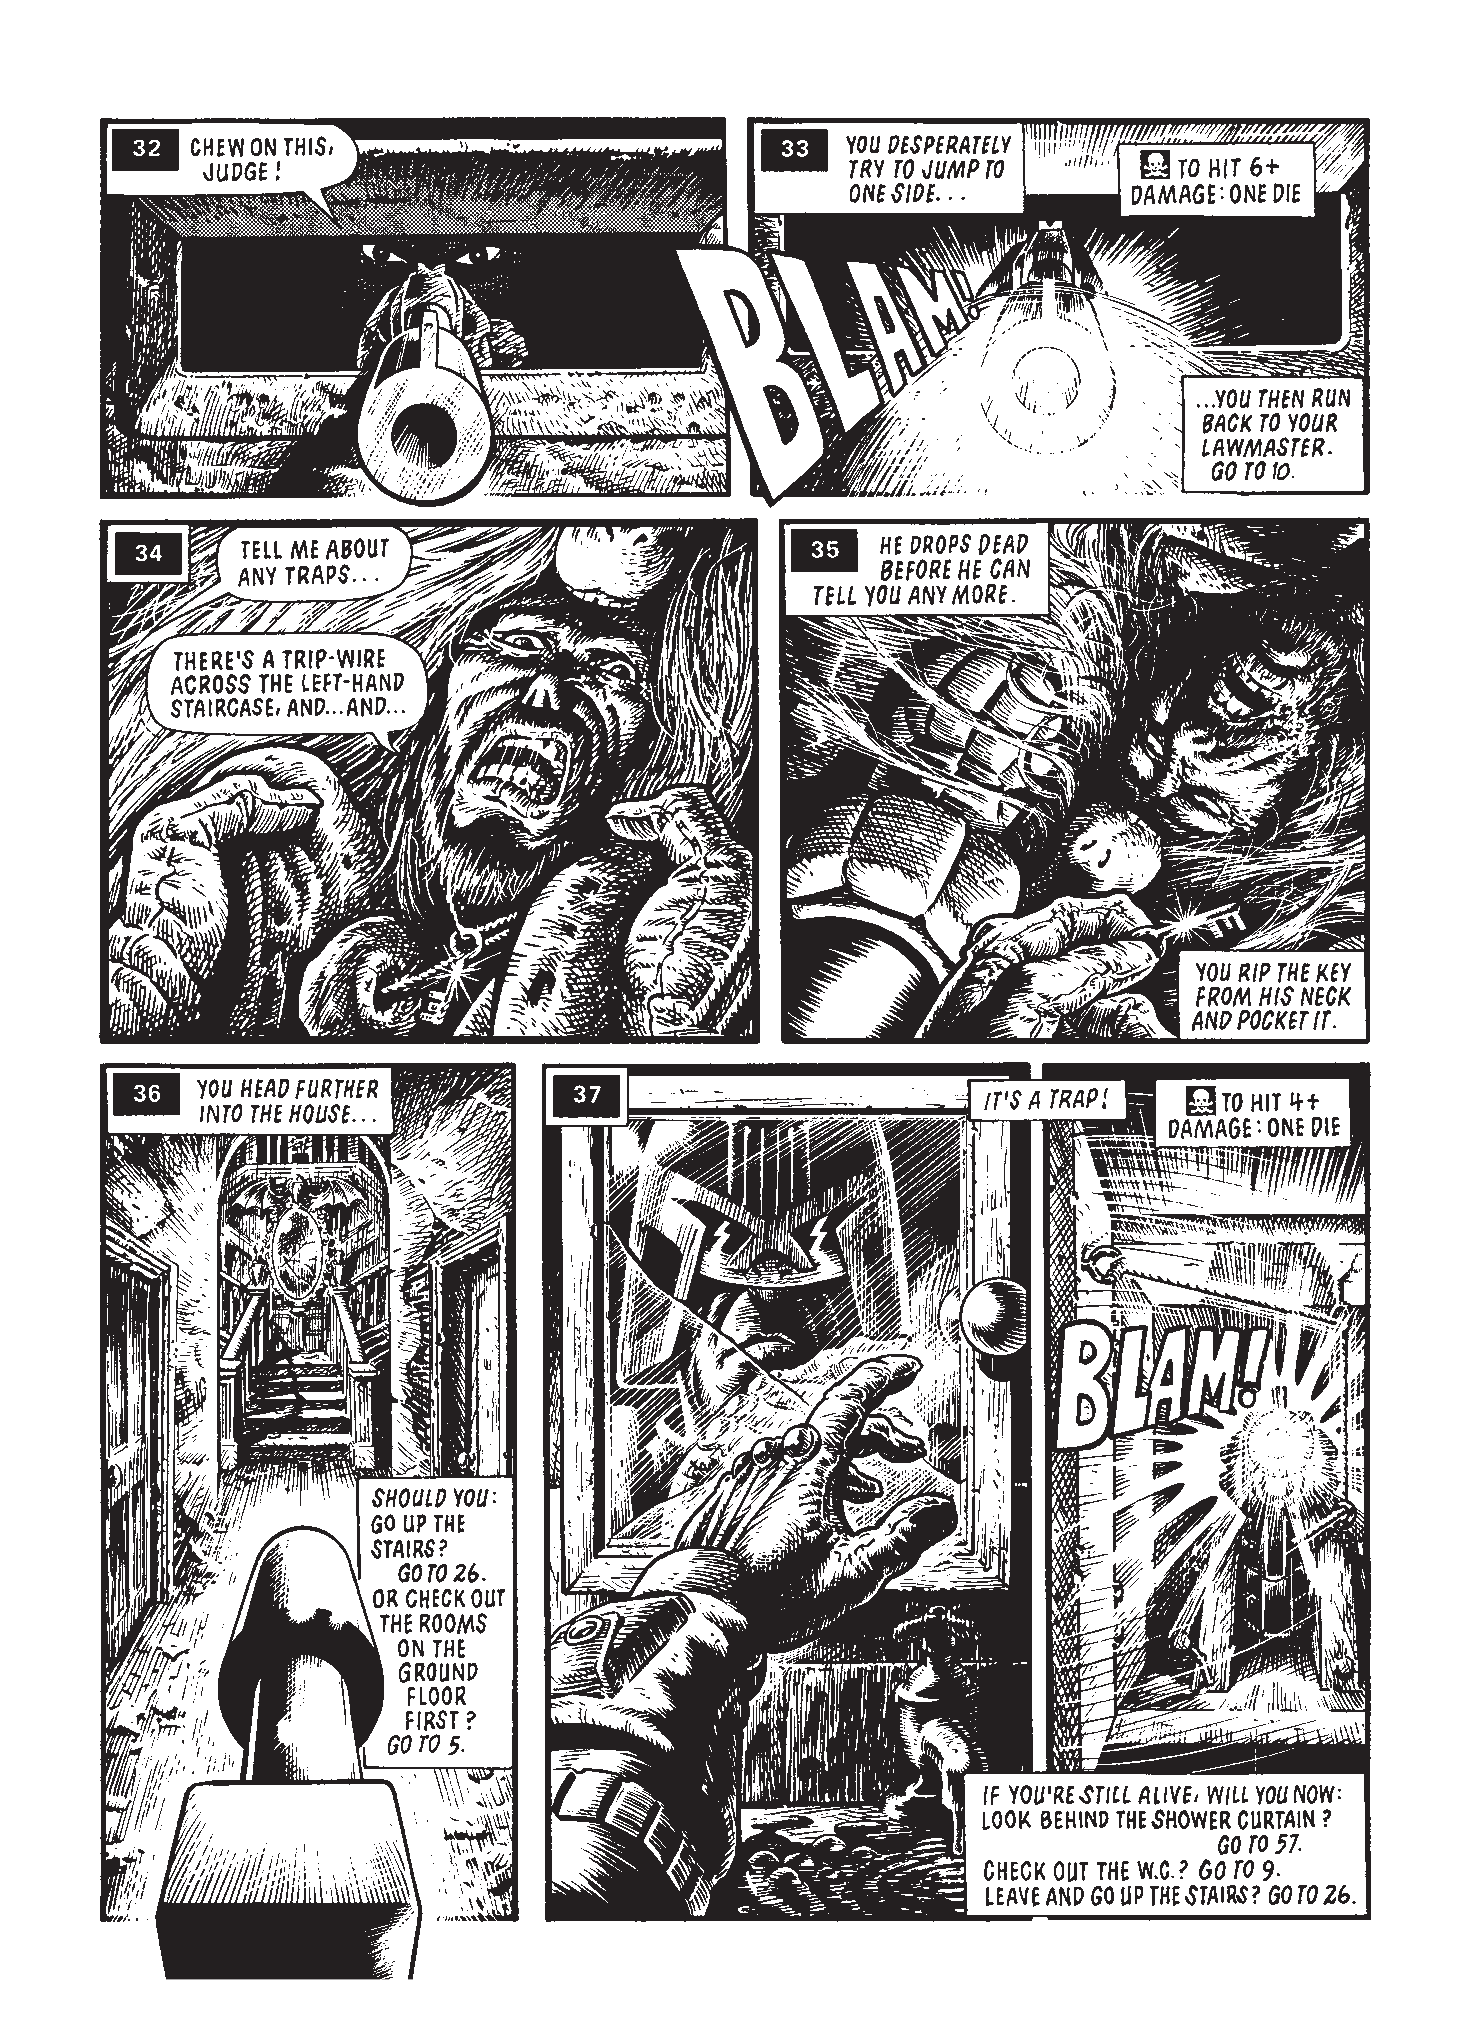 Read online Judge Dredd: The Restricted Files comic -  Issue # TPB 4 - 227